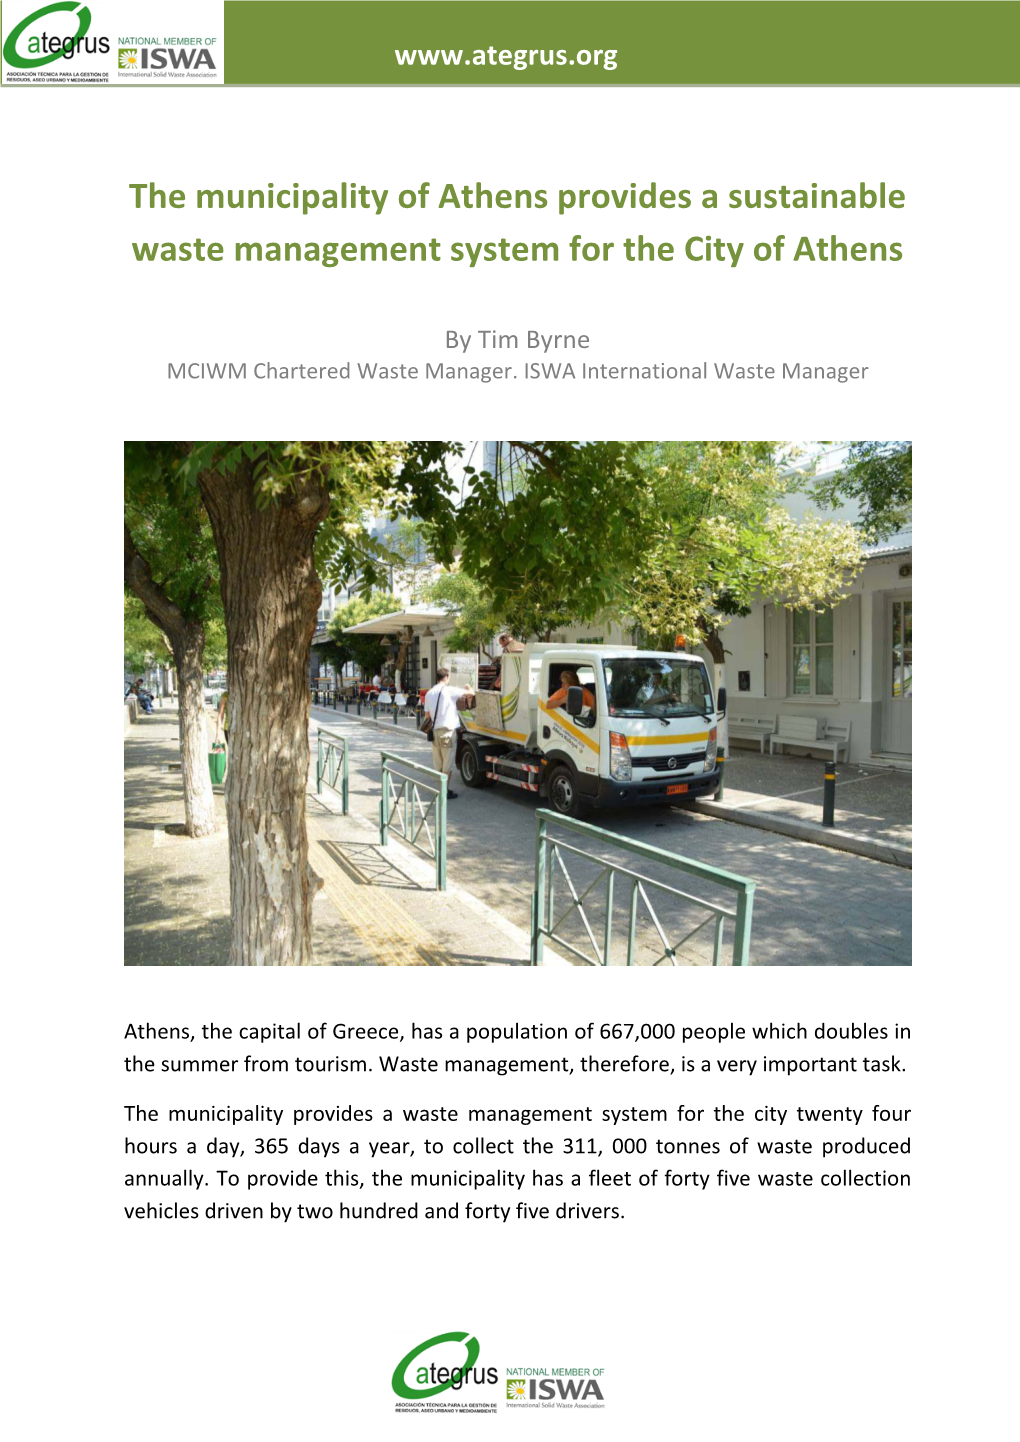 The Municipality of Athens Provides a Sustainable Waste Management System for the City of Athens